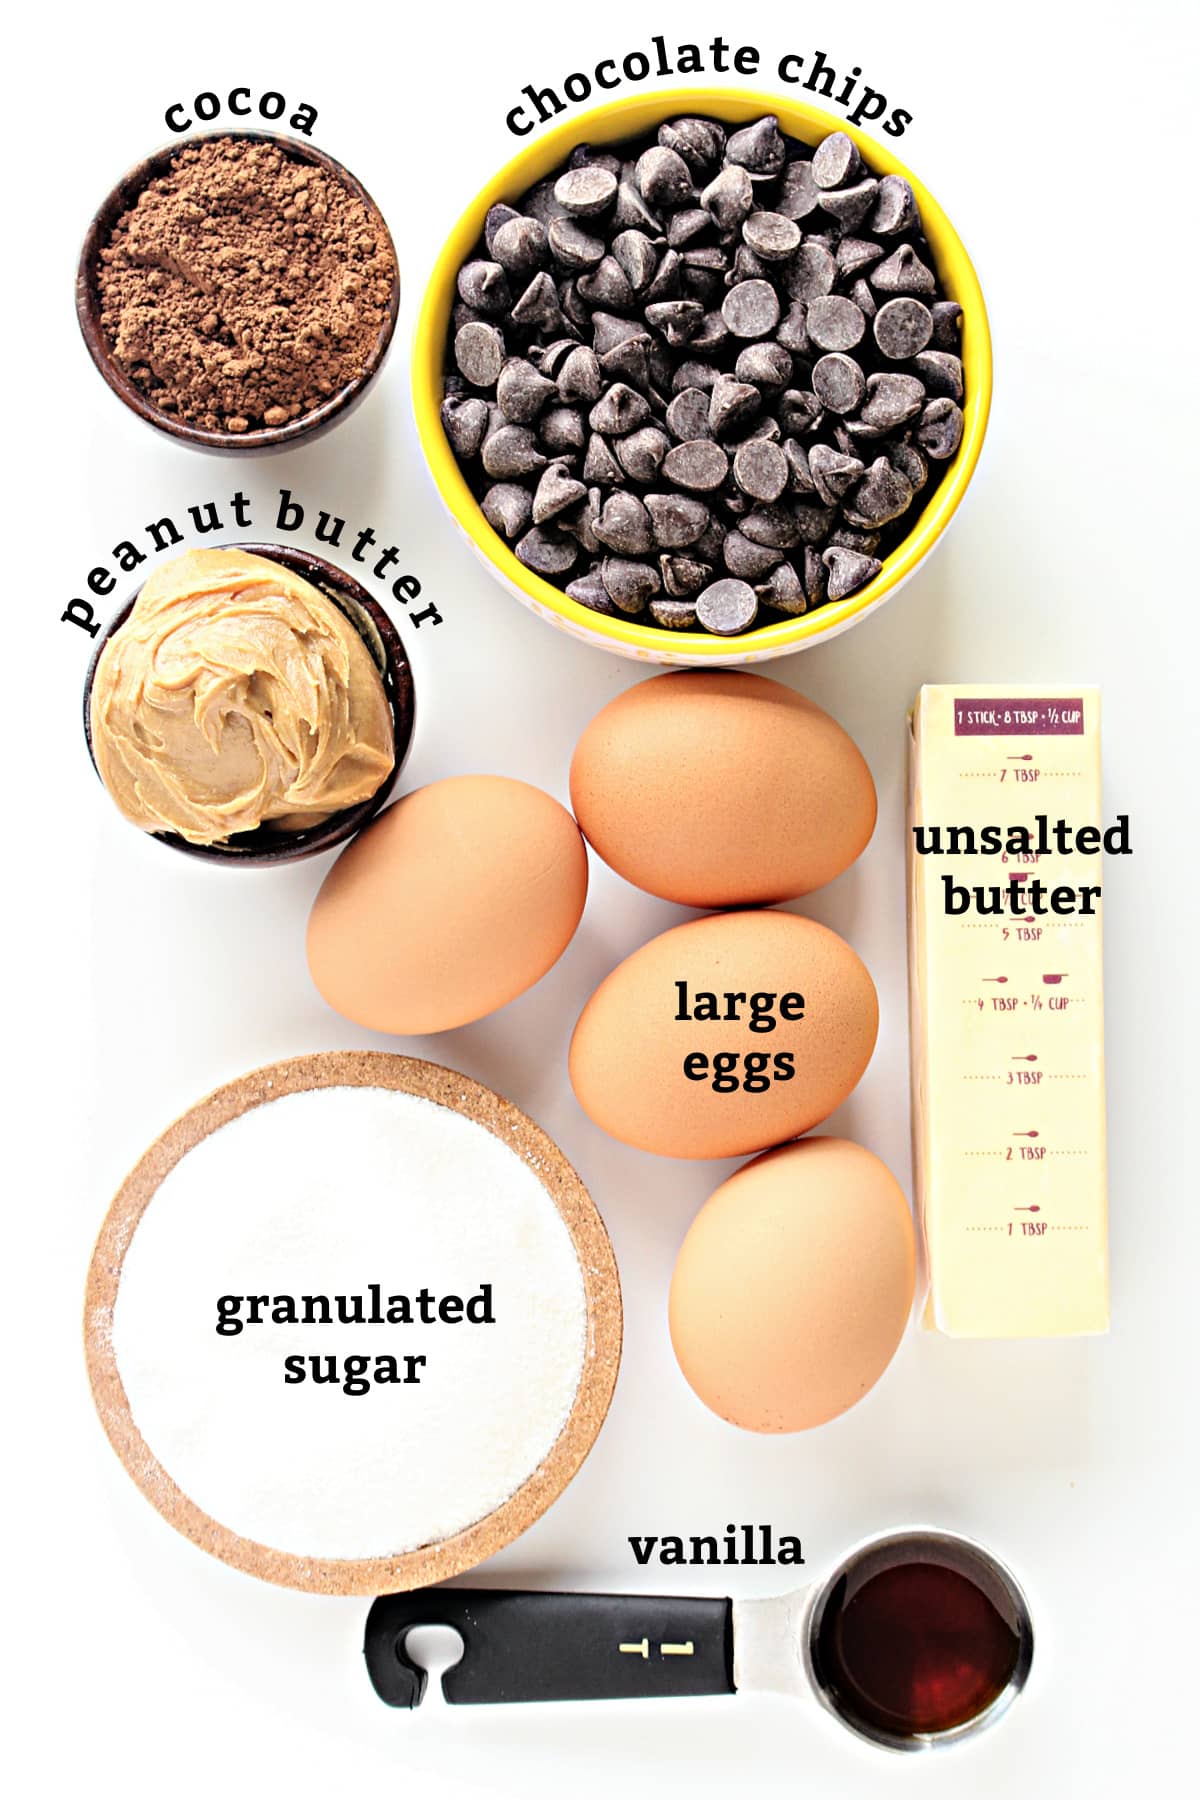 Ingredients: cocoa powder, chocolate chips, peanut butter, large eggs, unsalted butter, sugar, vanilla.